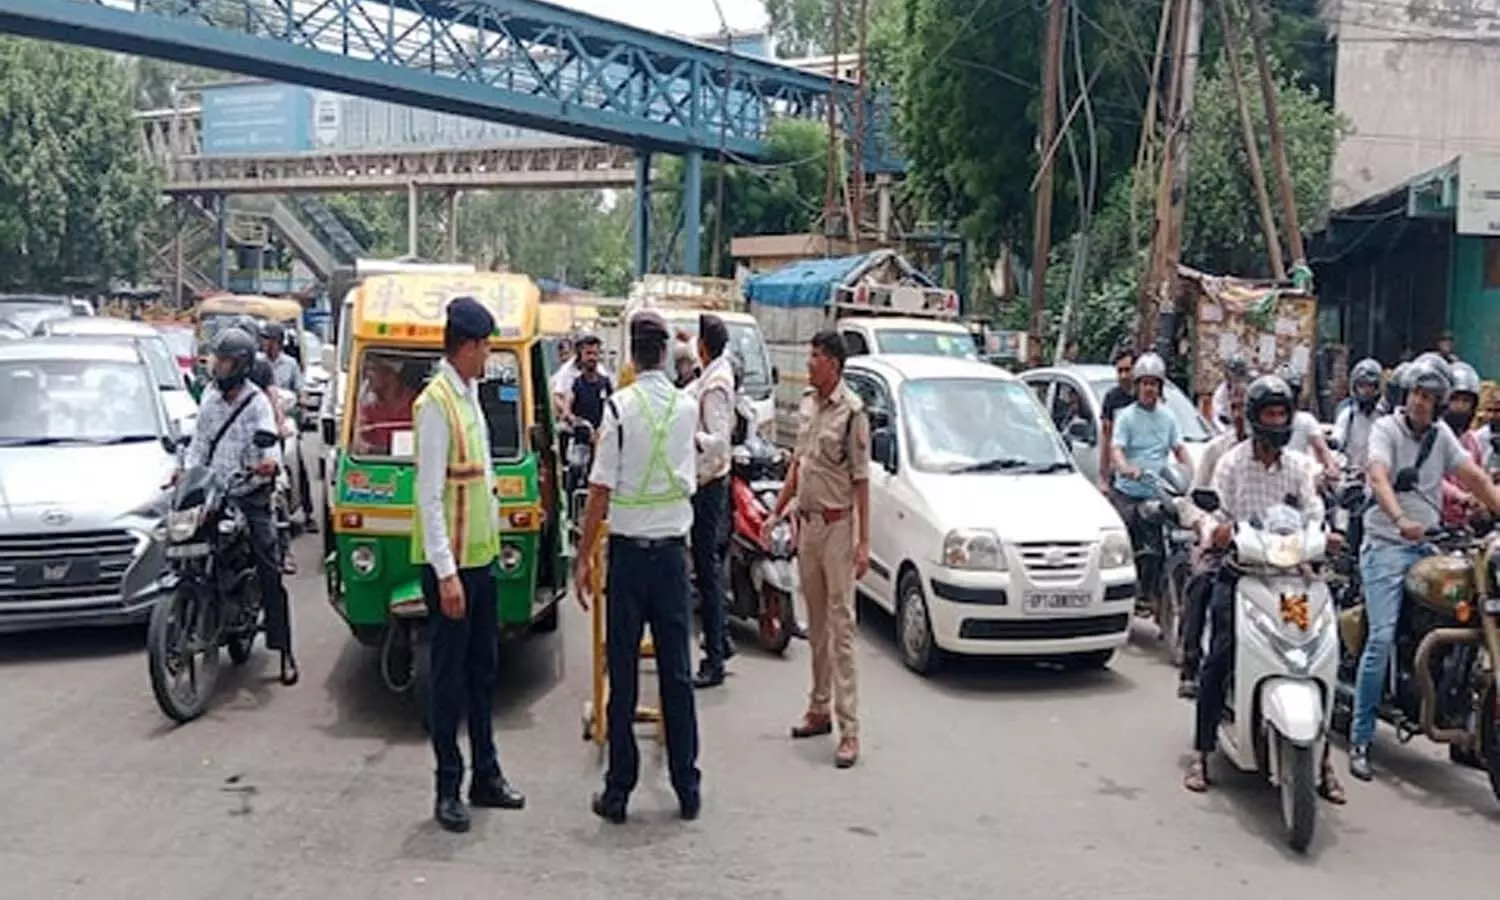 Due to the apathy of the city administration traffic police in Kaushambi, incurable jam became incurable in Bharwari Nagar.